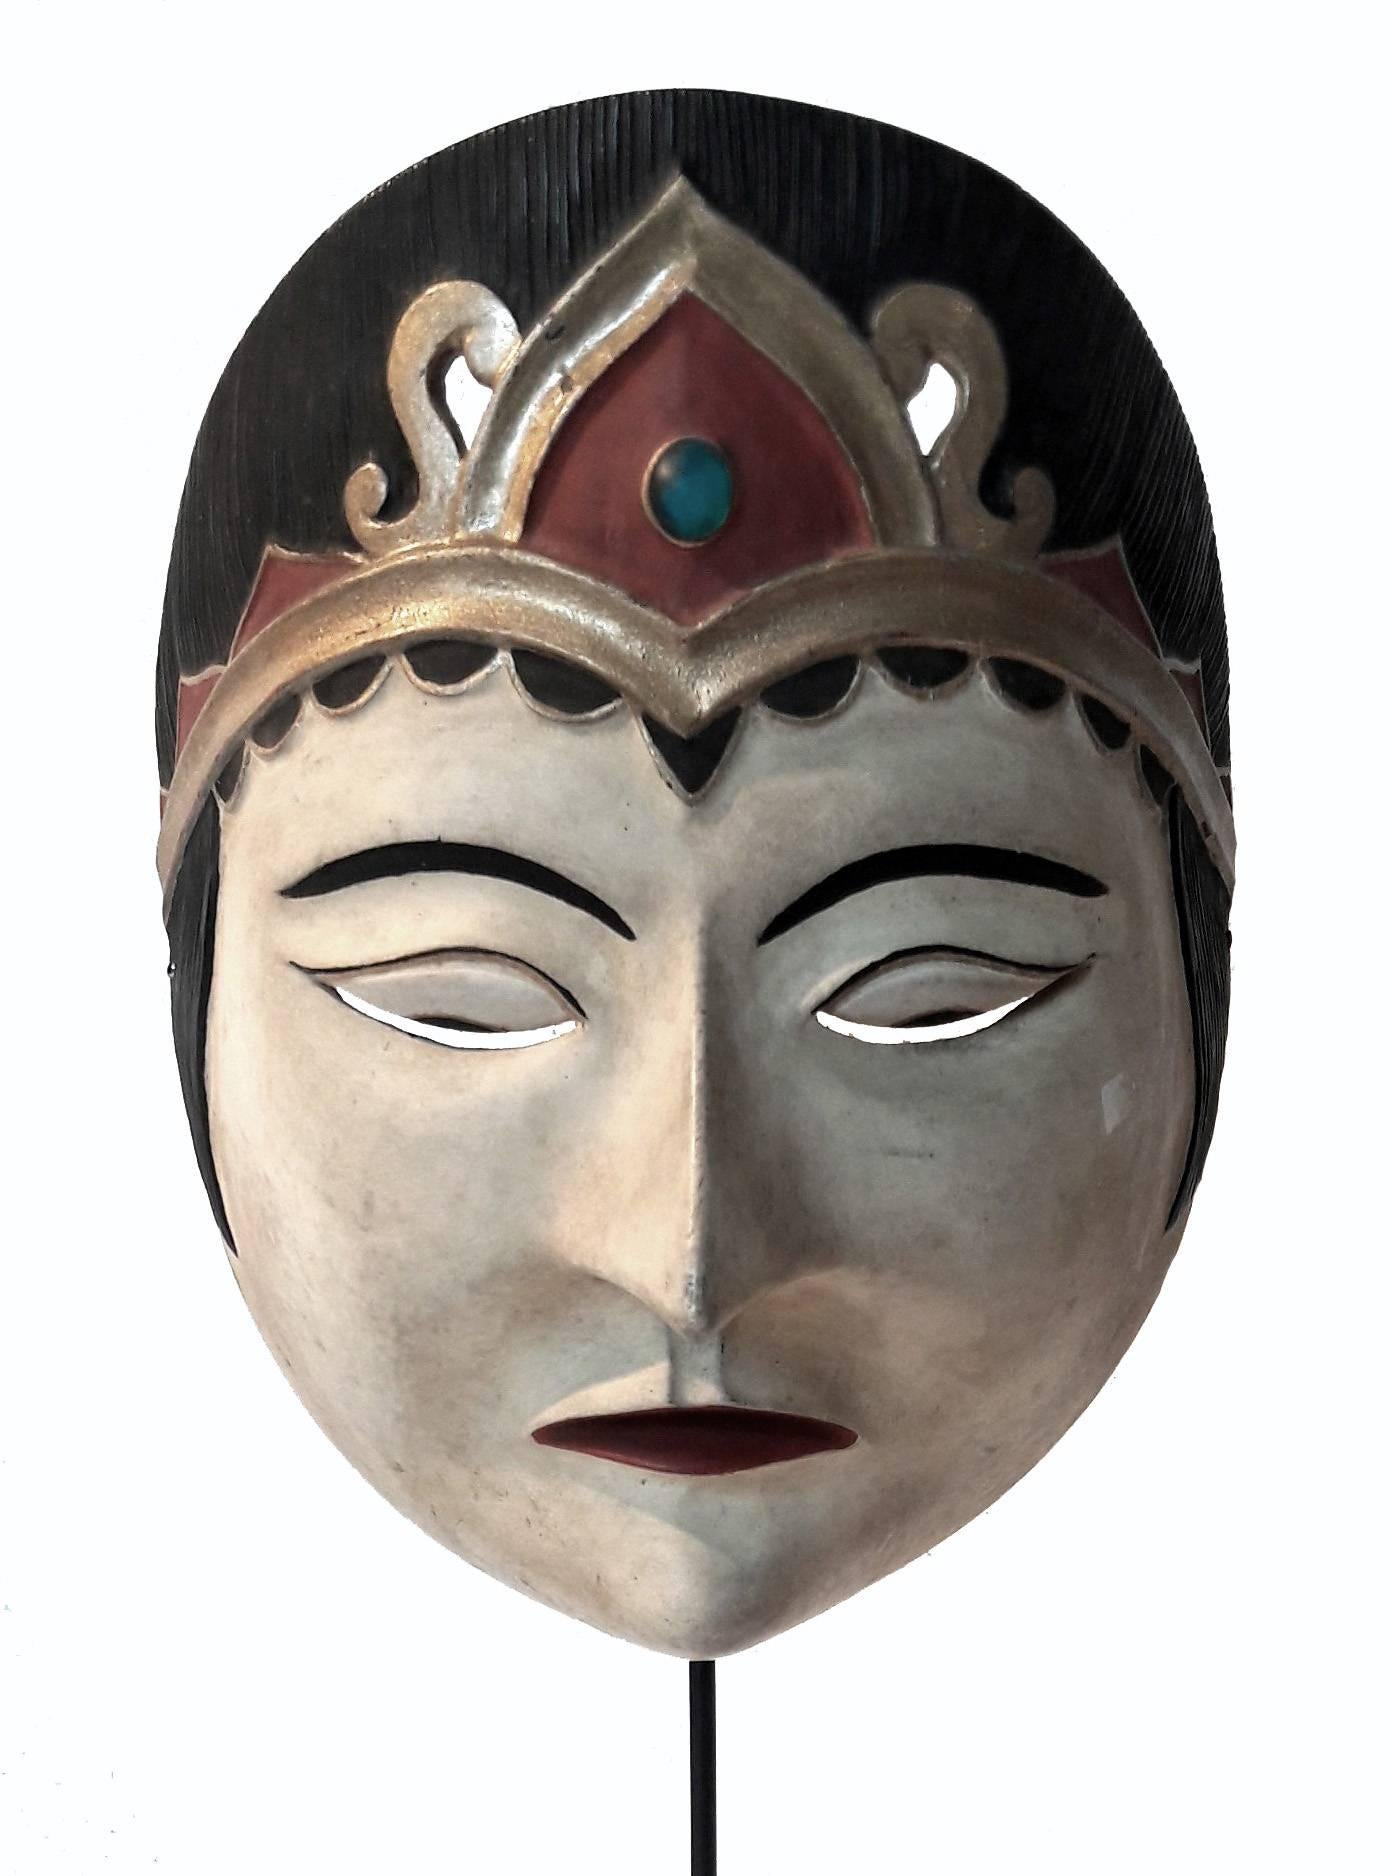 A selection of ceremonial masks from Indonesia. Styles, colors and sizes vary. Priced separately. Price of tallest mask shown below.

This masks are made of hand-carved wood and decorated with polychrome paints. They represent diverse characters